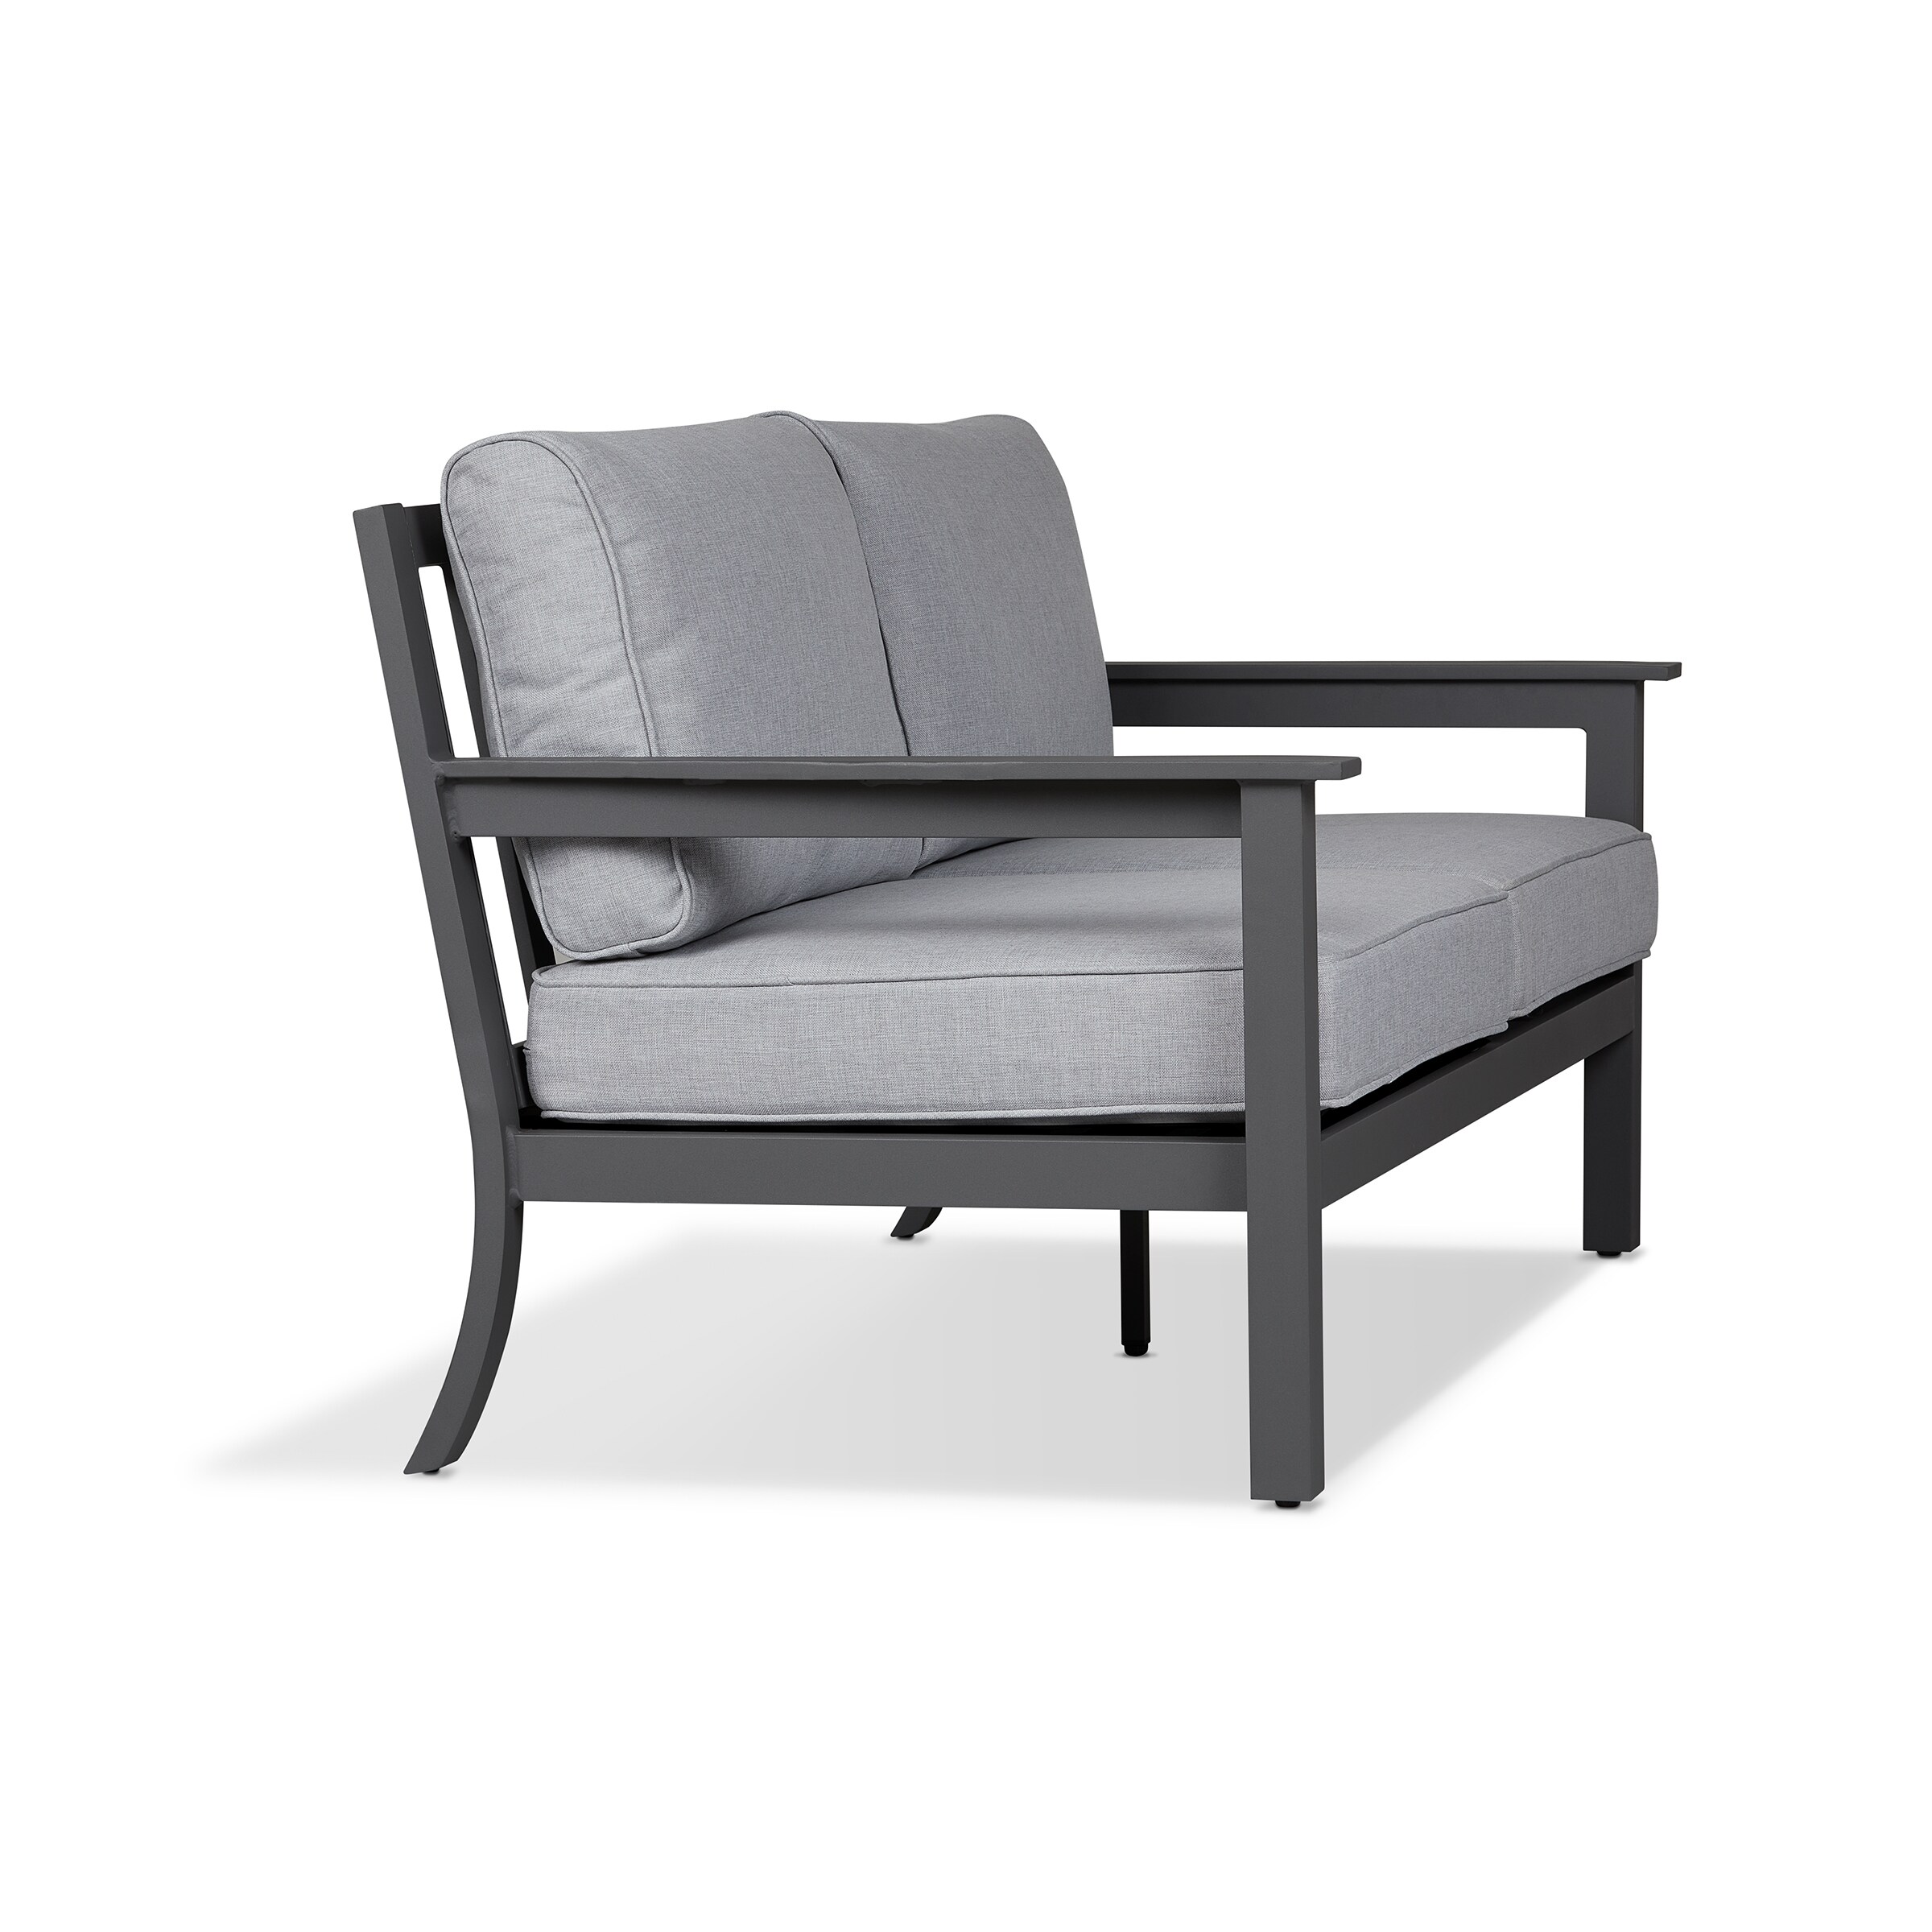 Real Flame Ortun Outdoor 2-Seat at department Sectionals Light Sofa Sofas Patio in in Gray the Gray Cushions with 